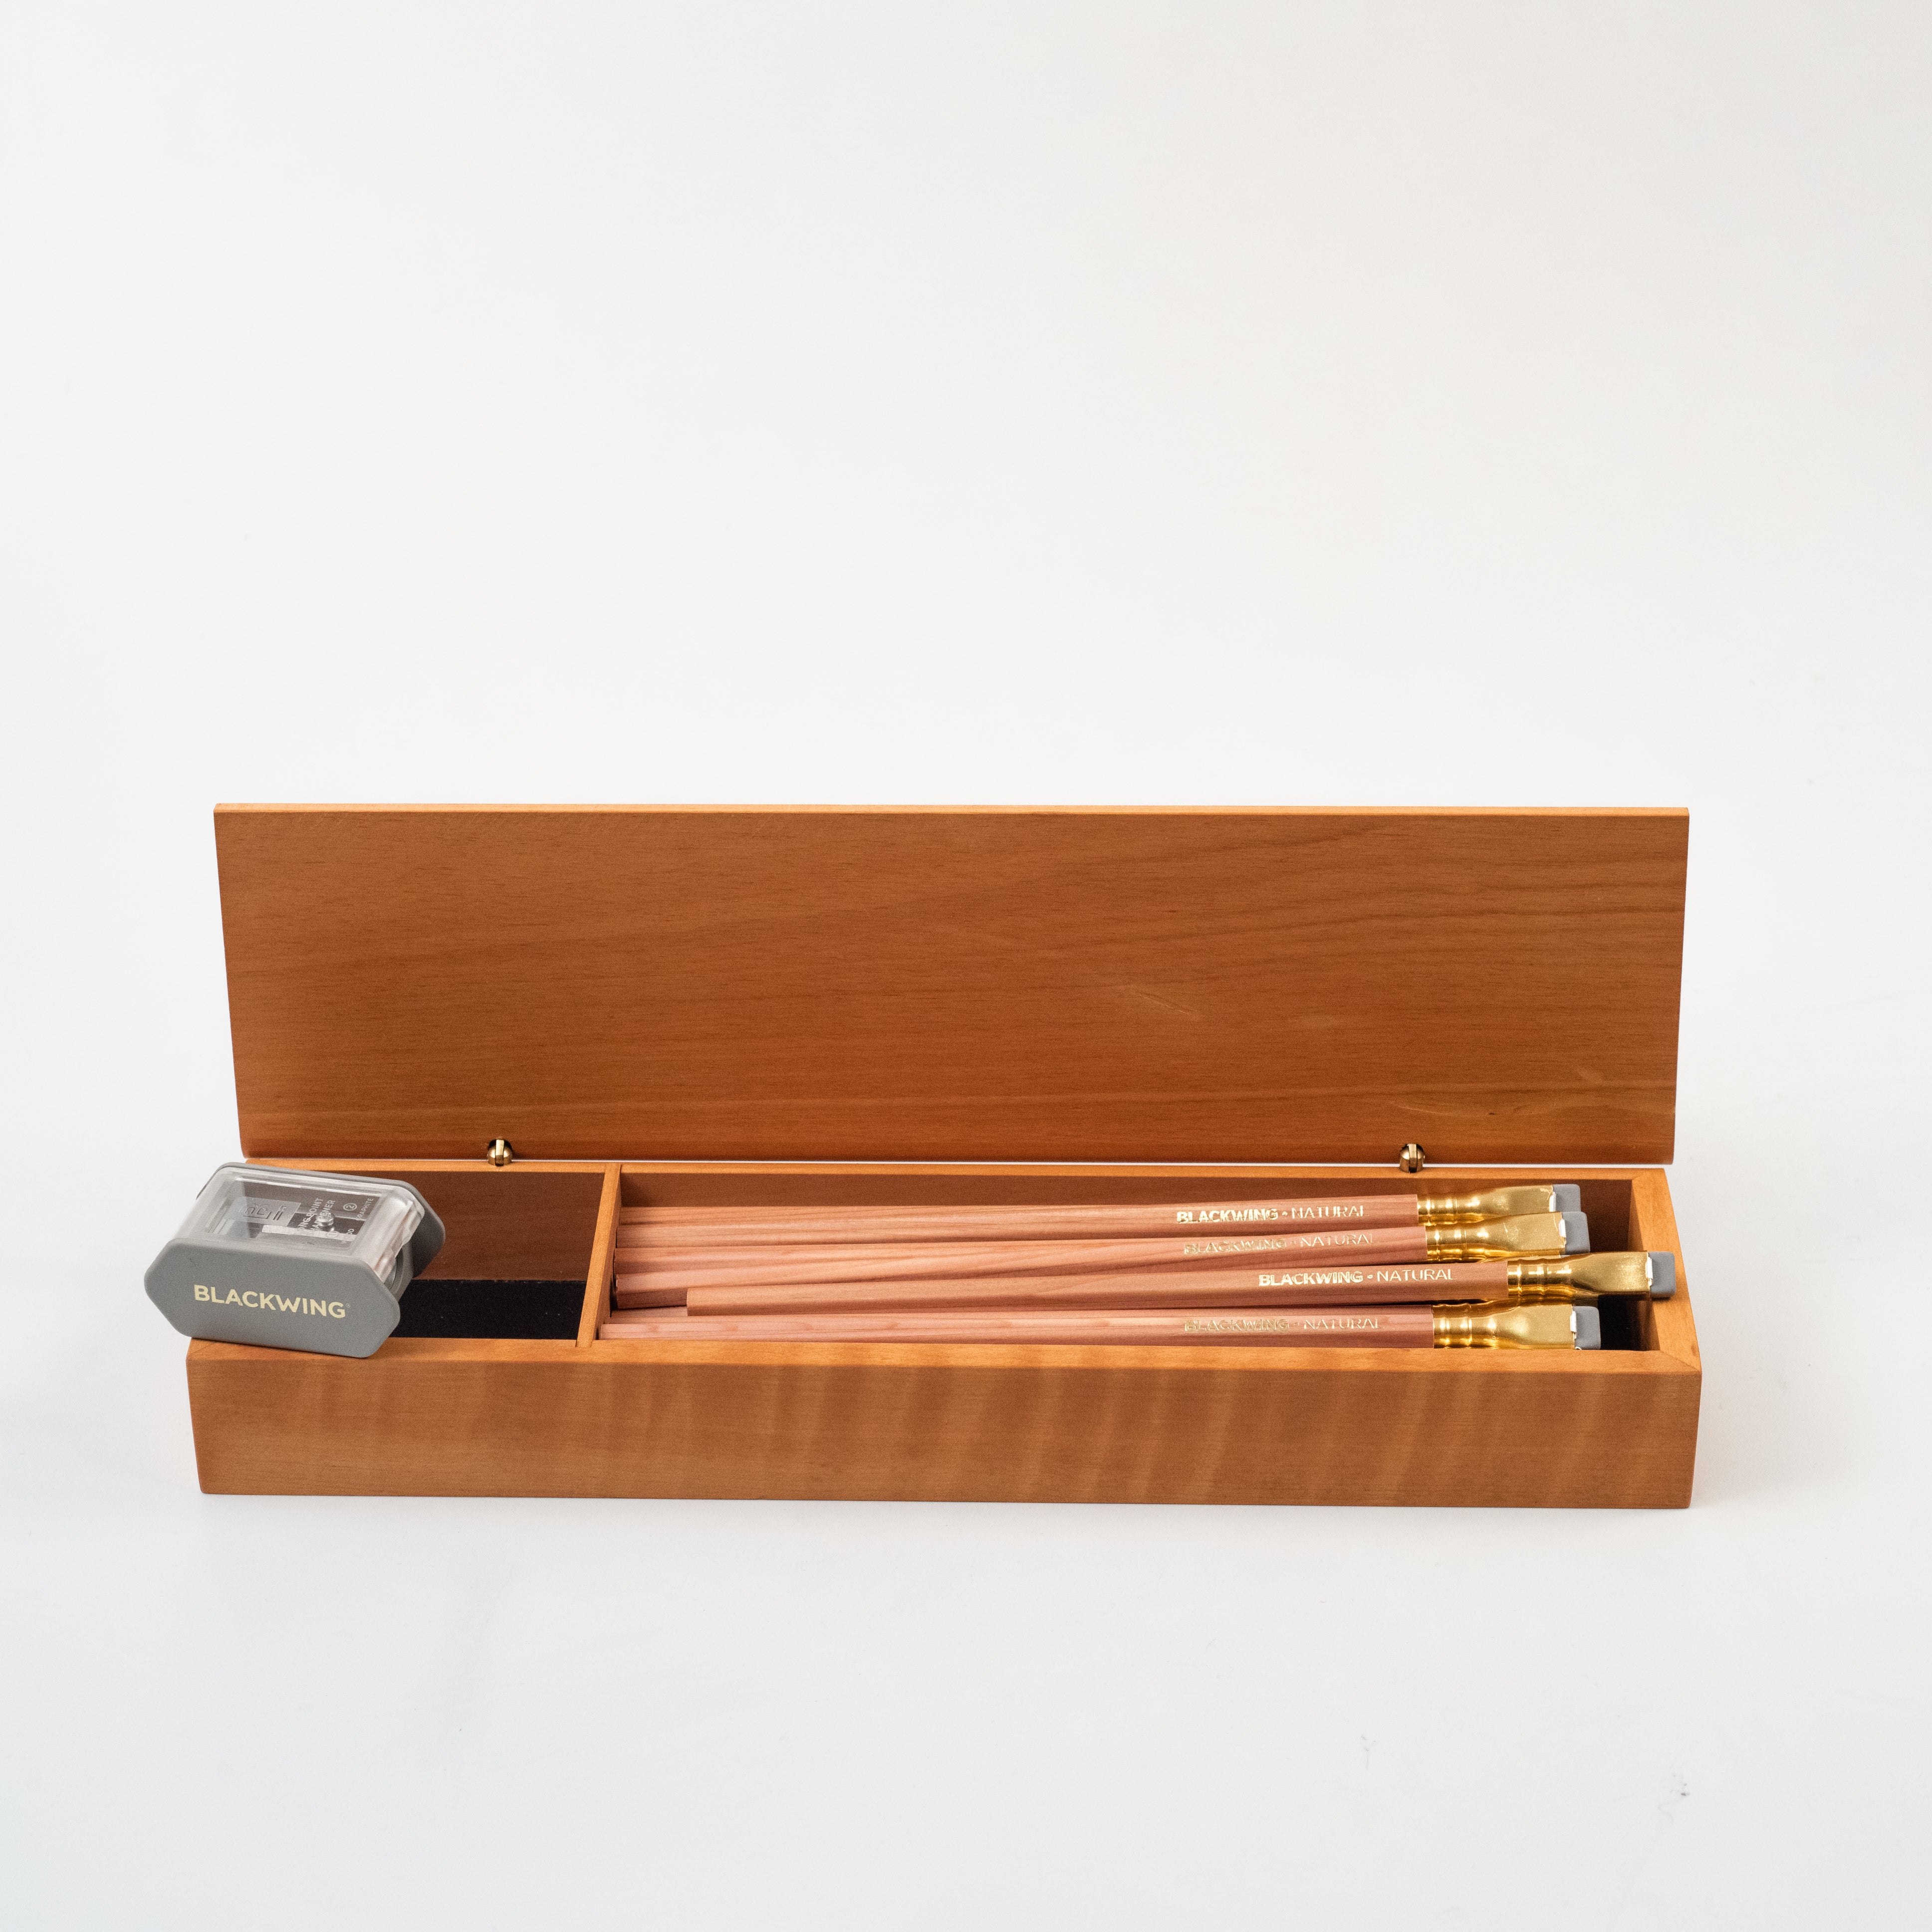 A Blackwing French Wood Box with Blackwing pencils and a pencil sharpener.